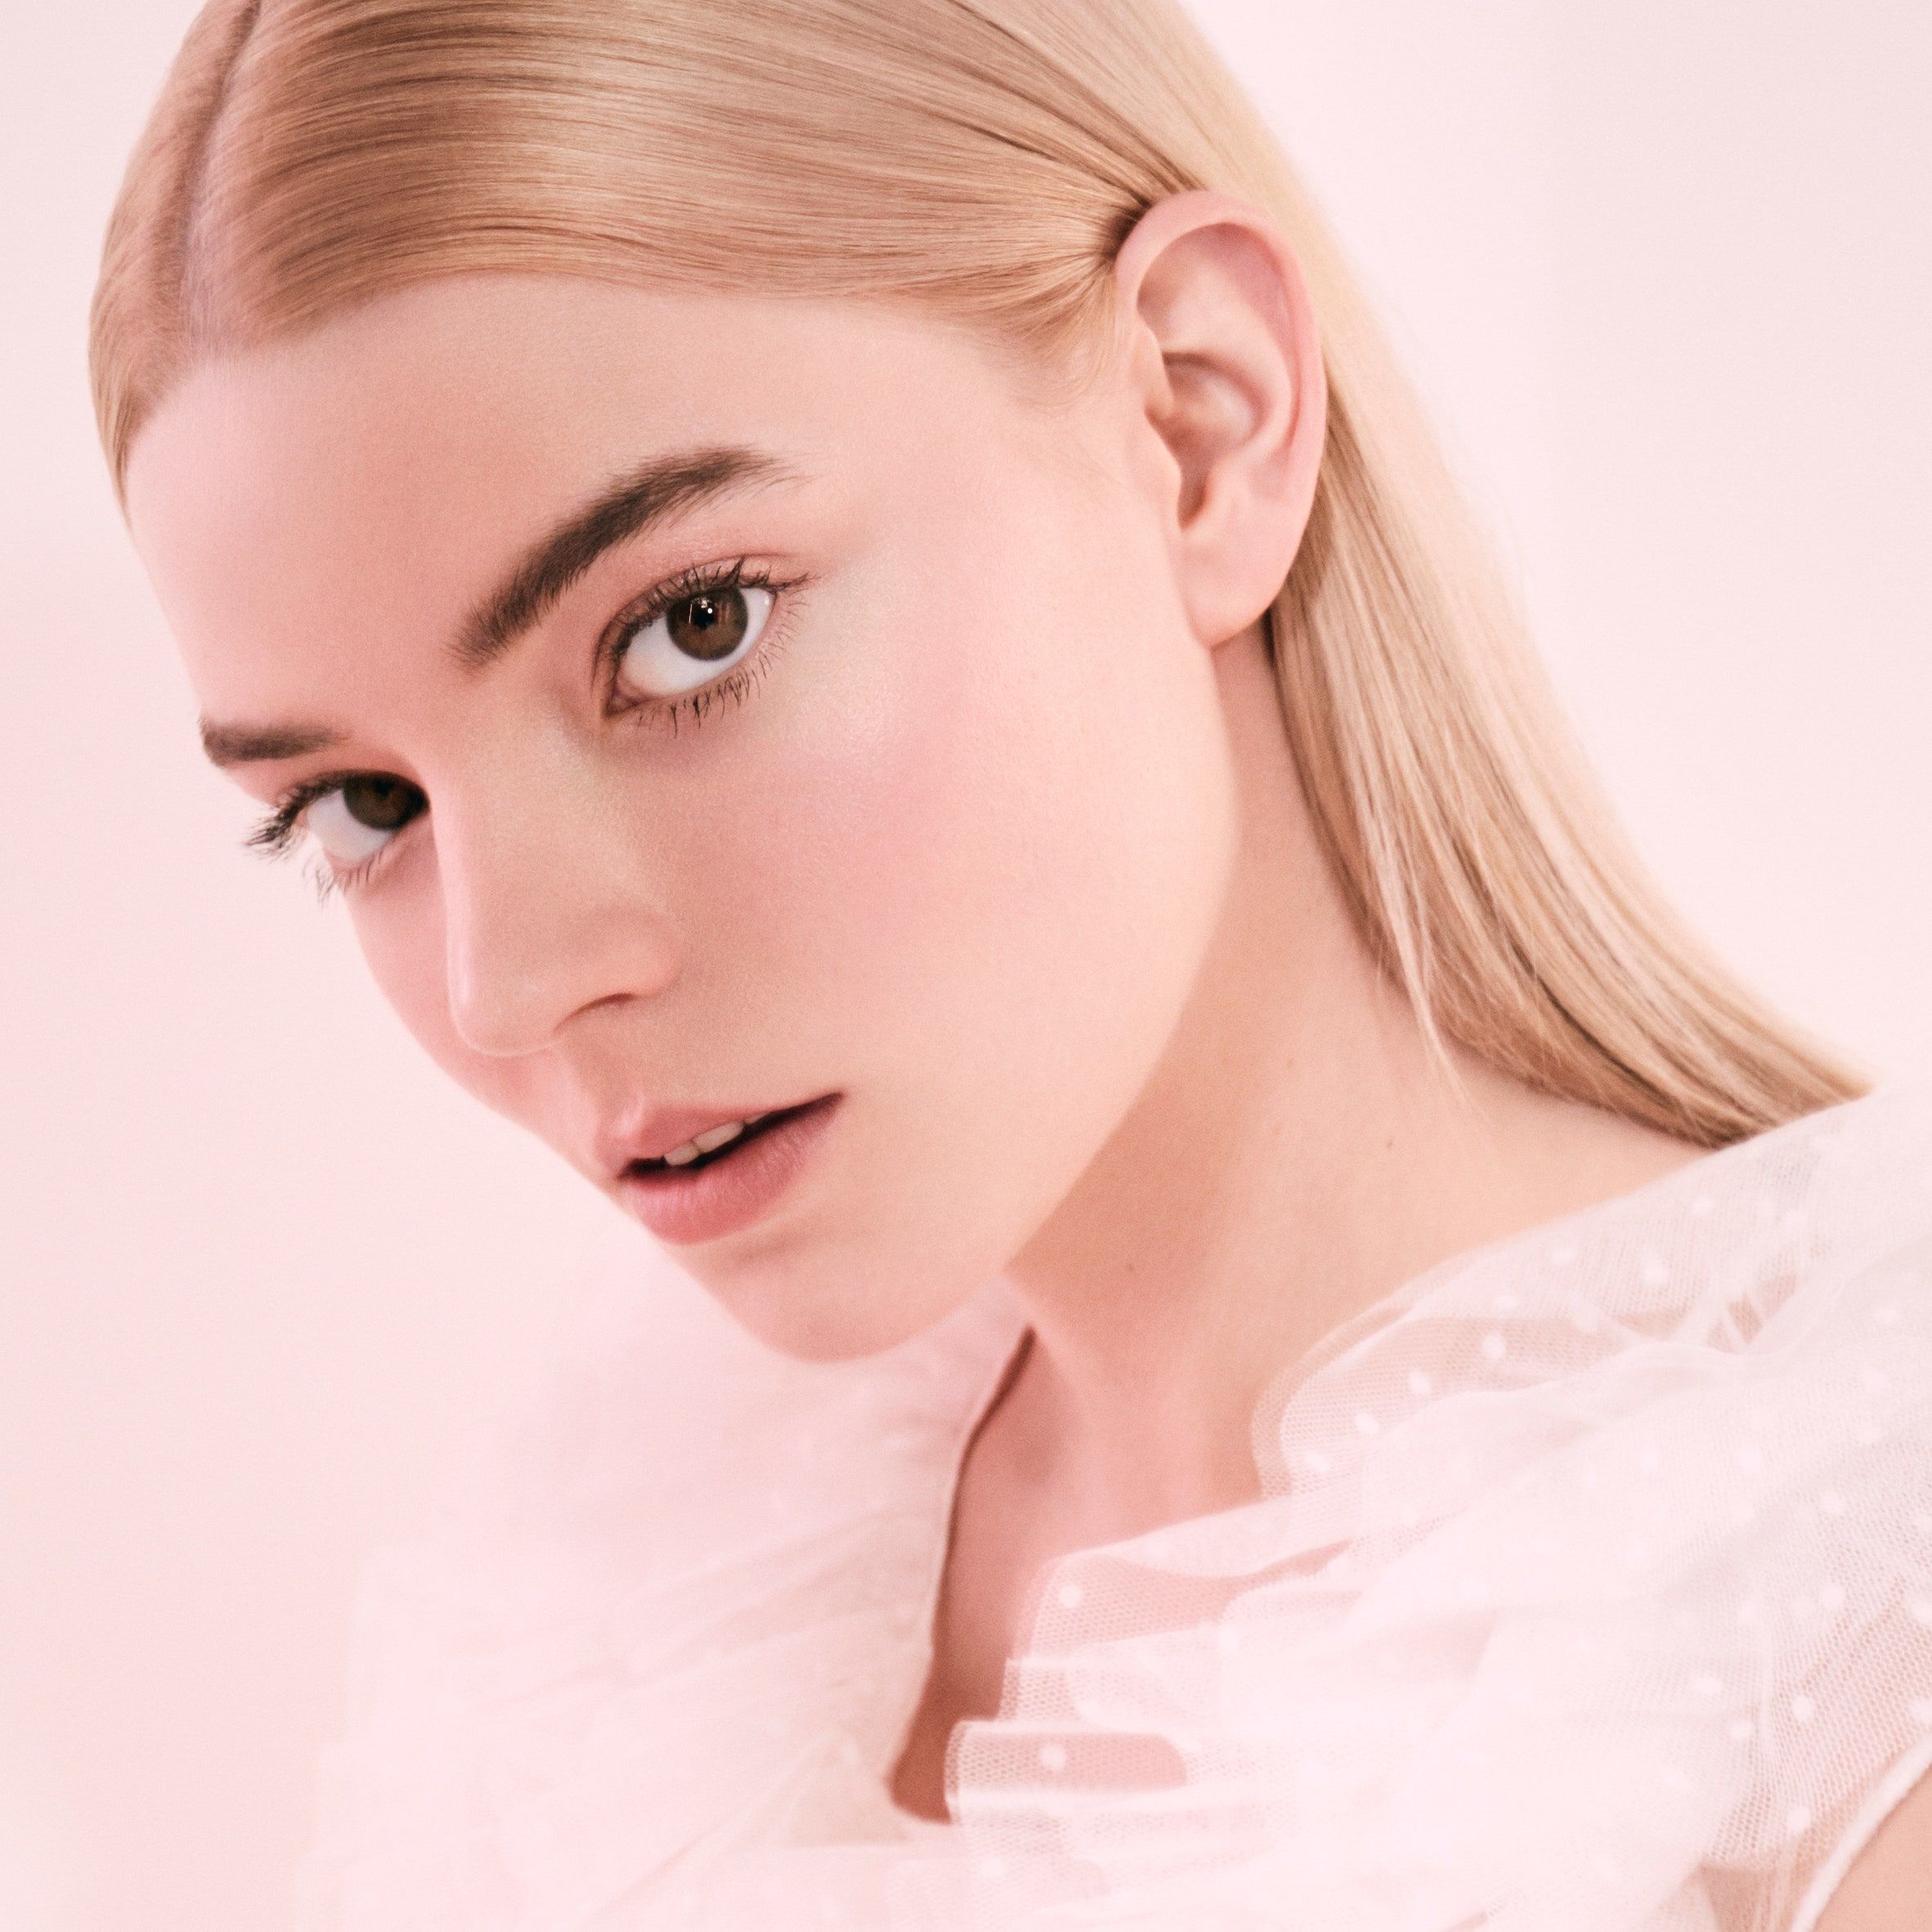 A woman with blonde hair and a white top. - Anya Taylor-Joy, pink